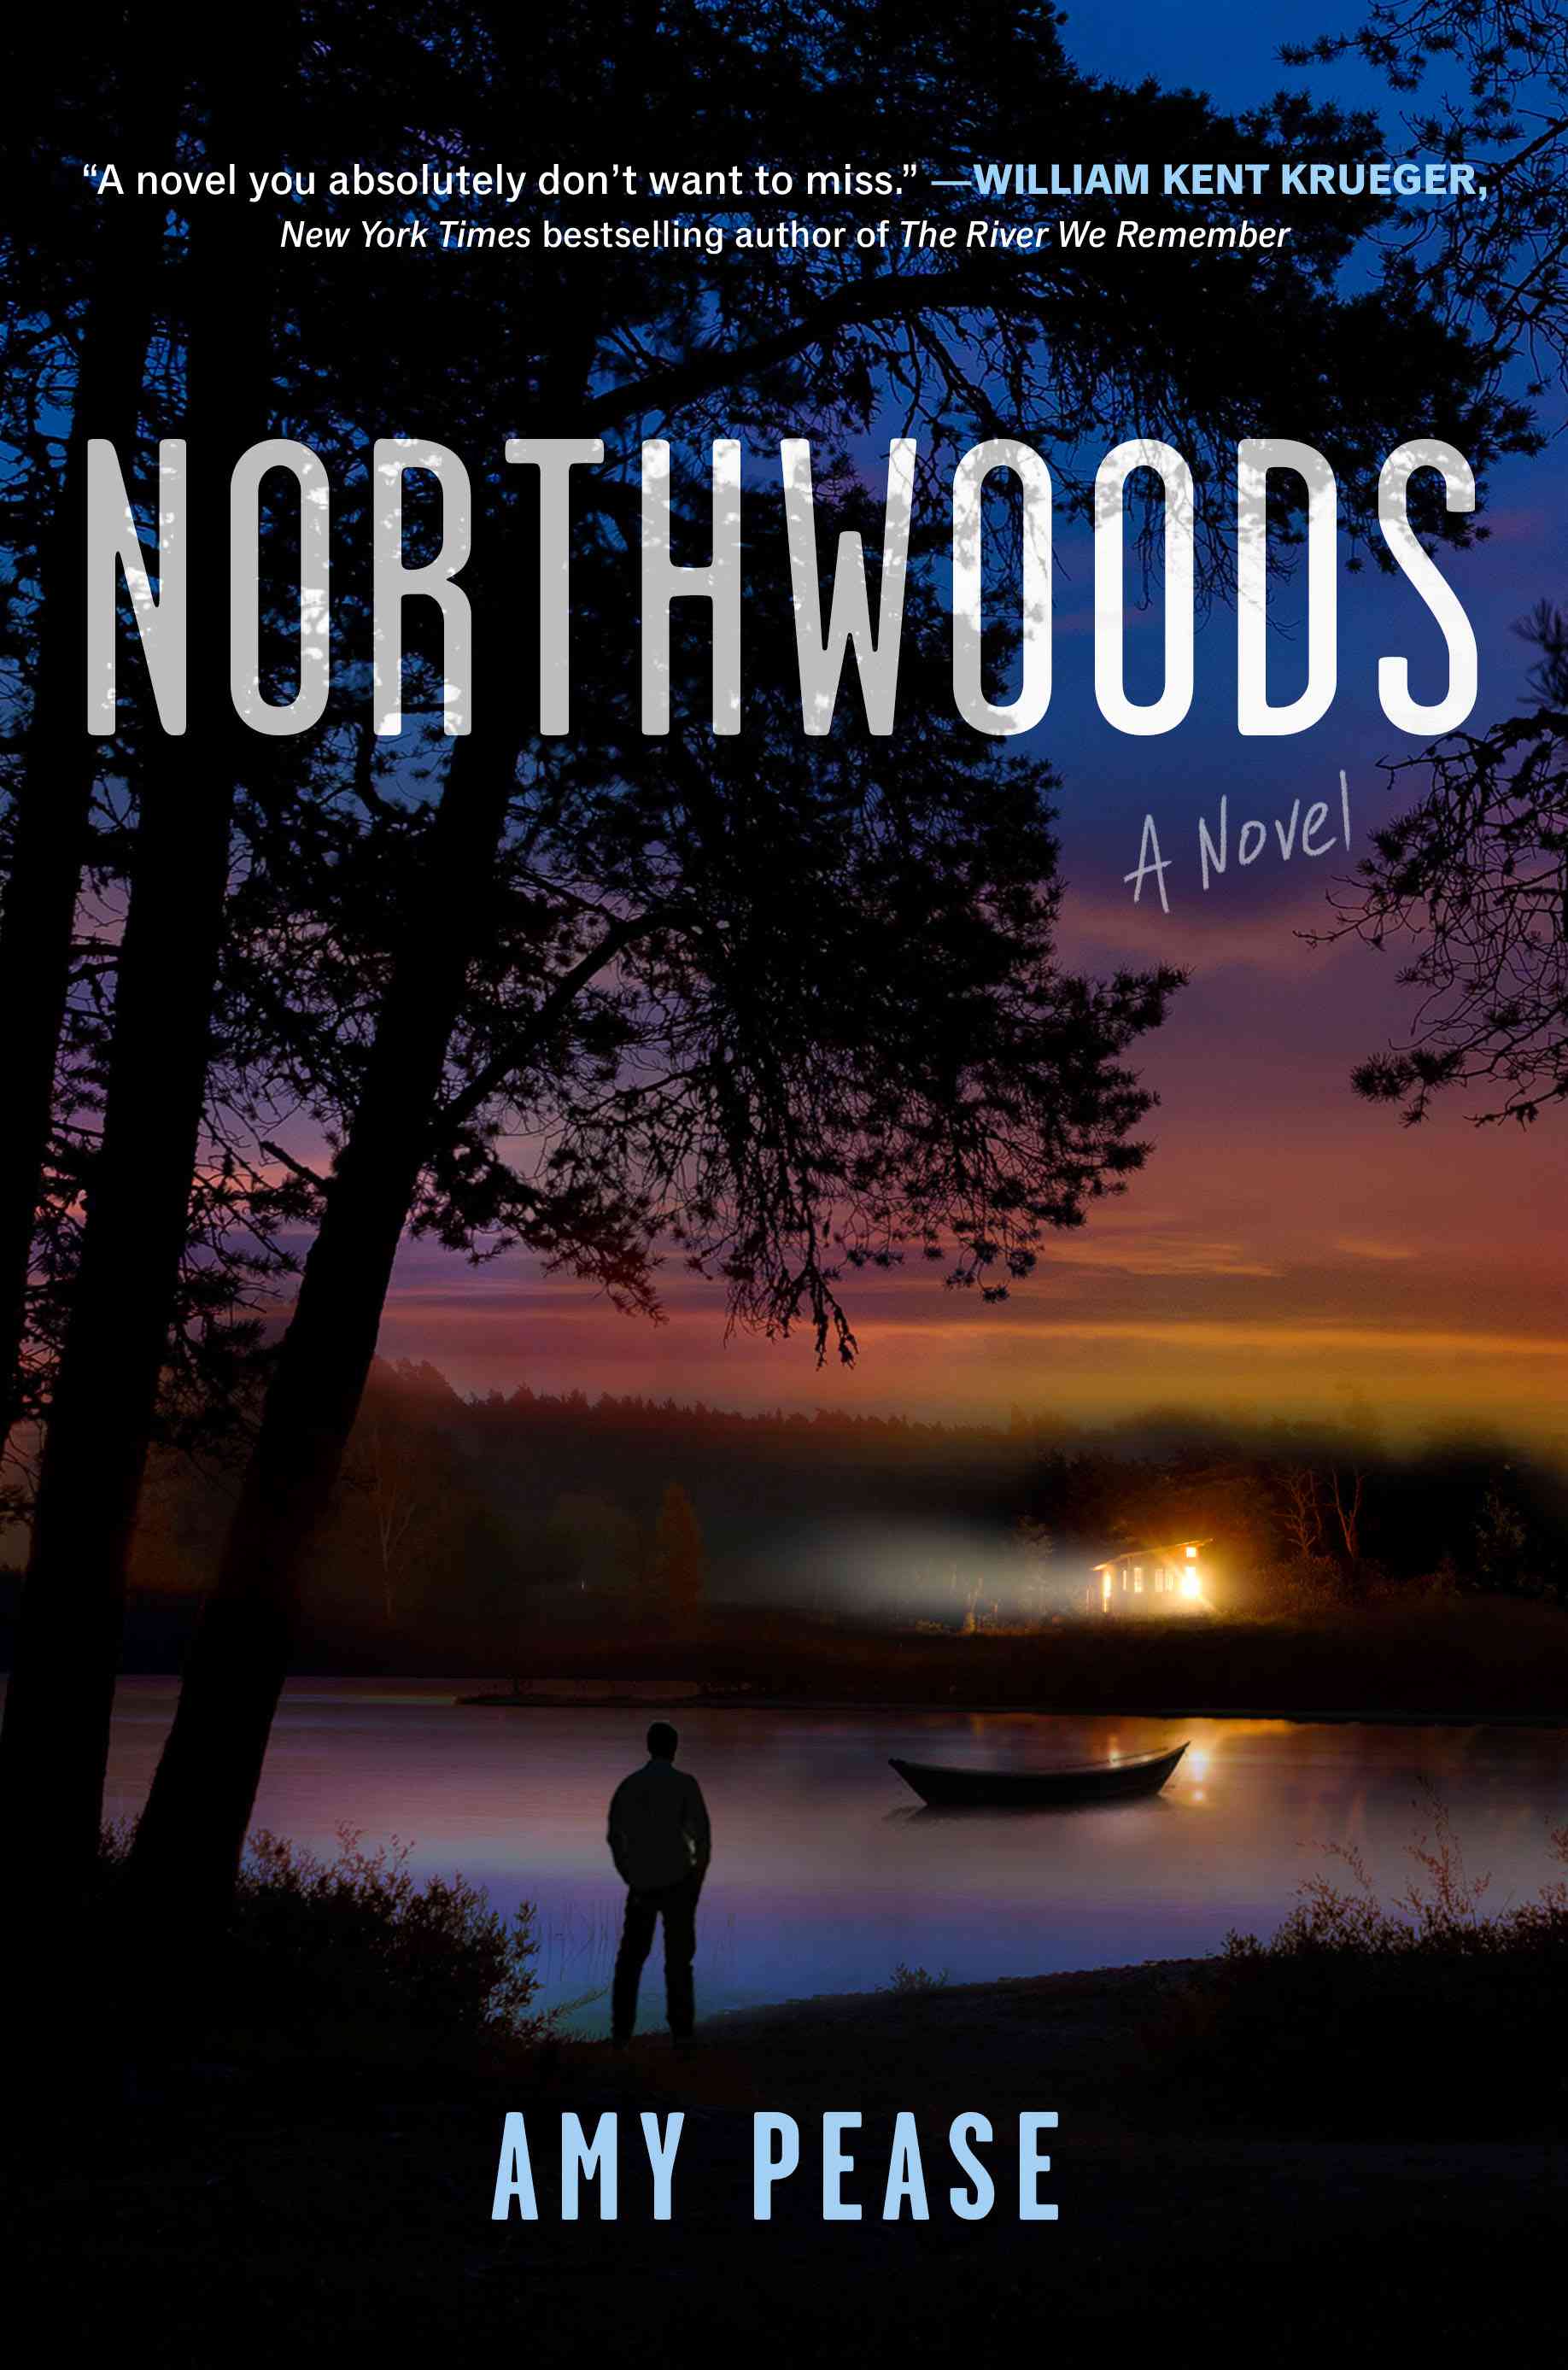 January people book picks northwoods by amy pease